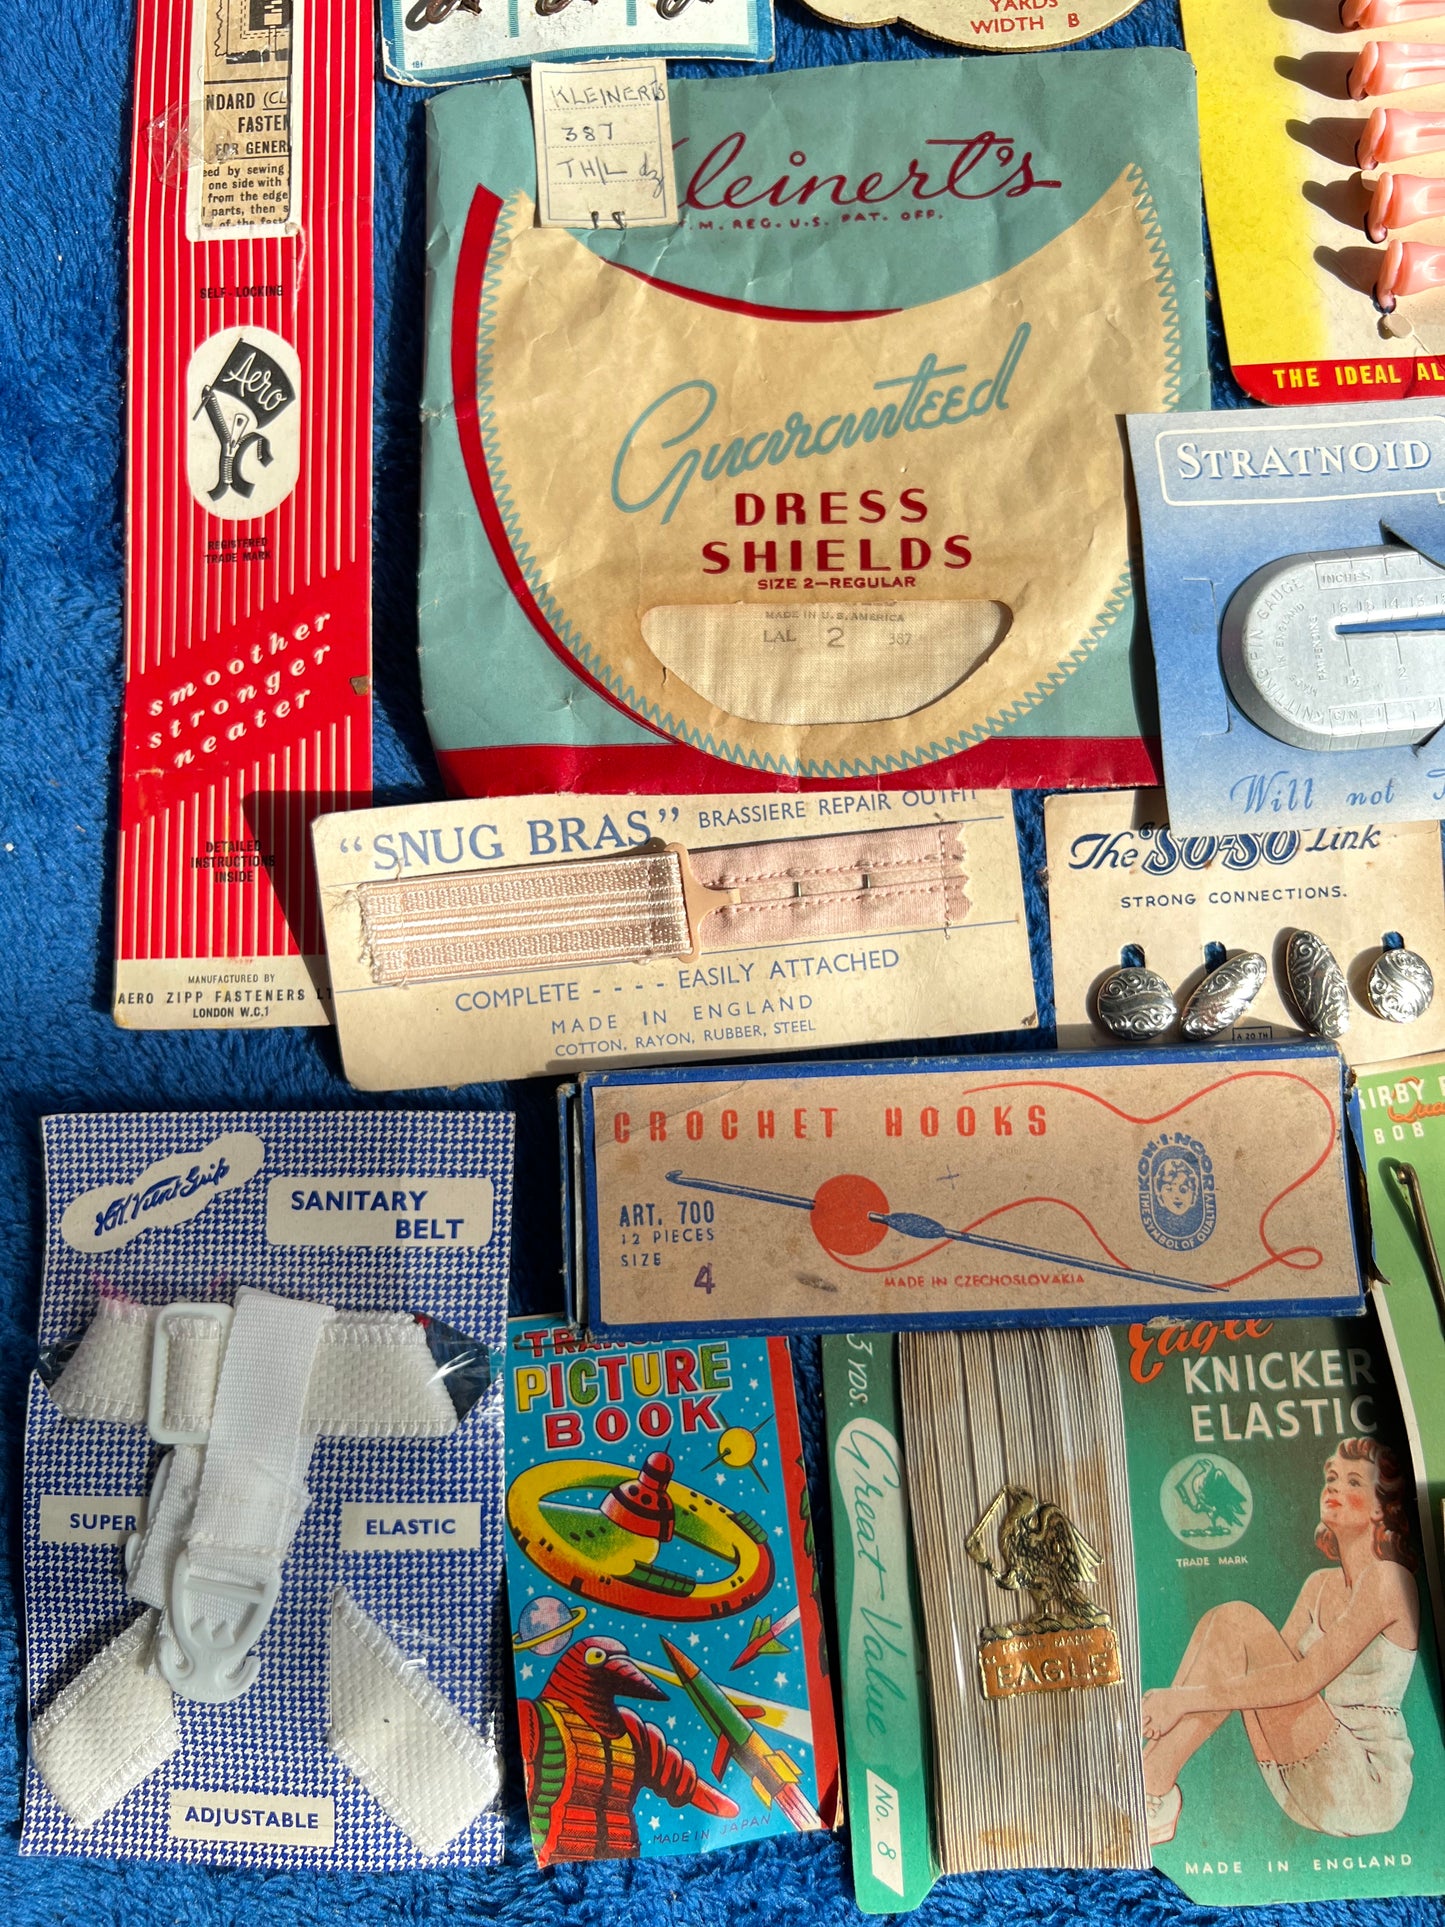 Job Lot of Vintage Packaging and Contents